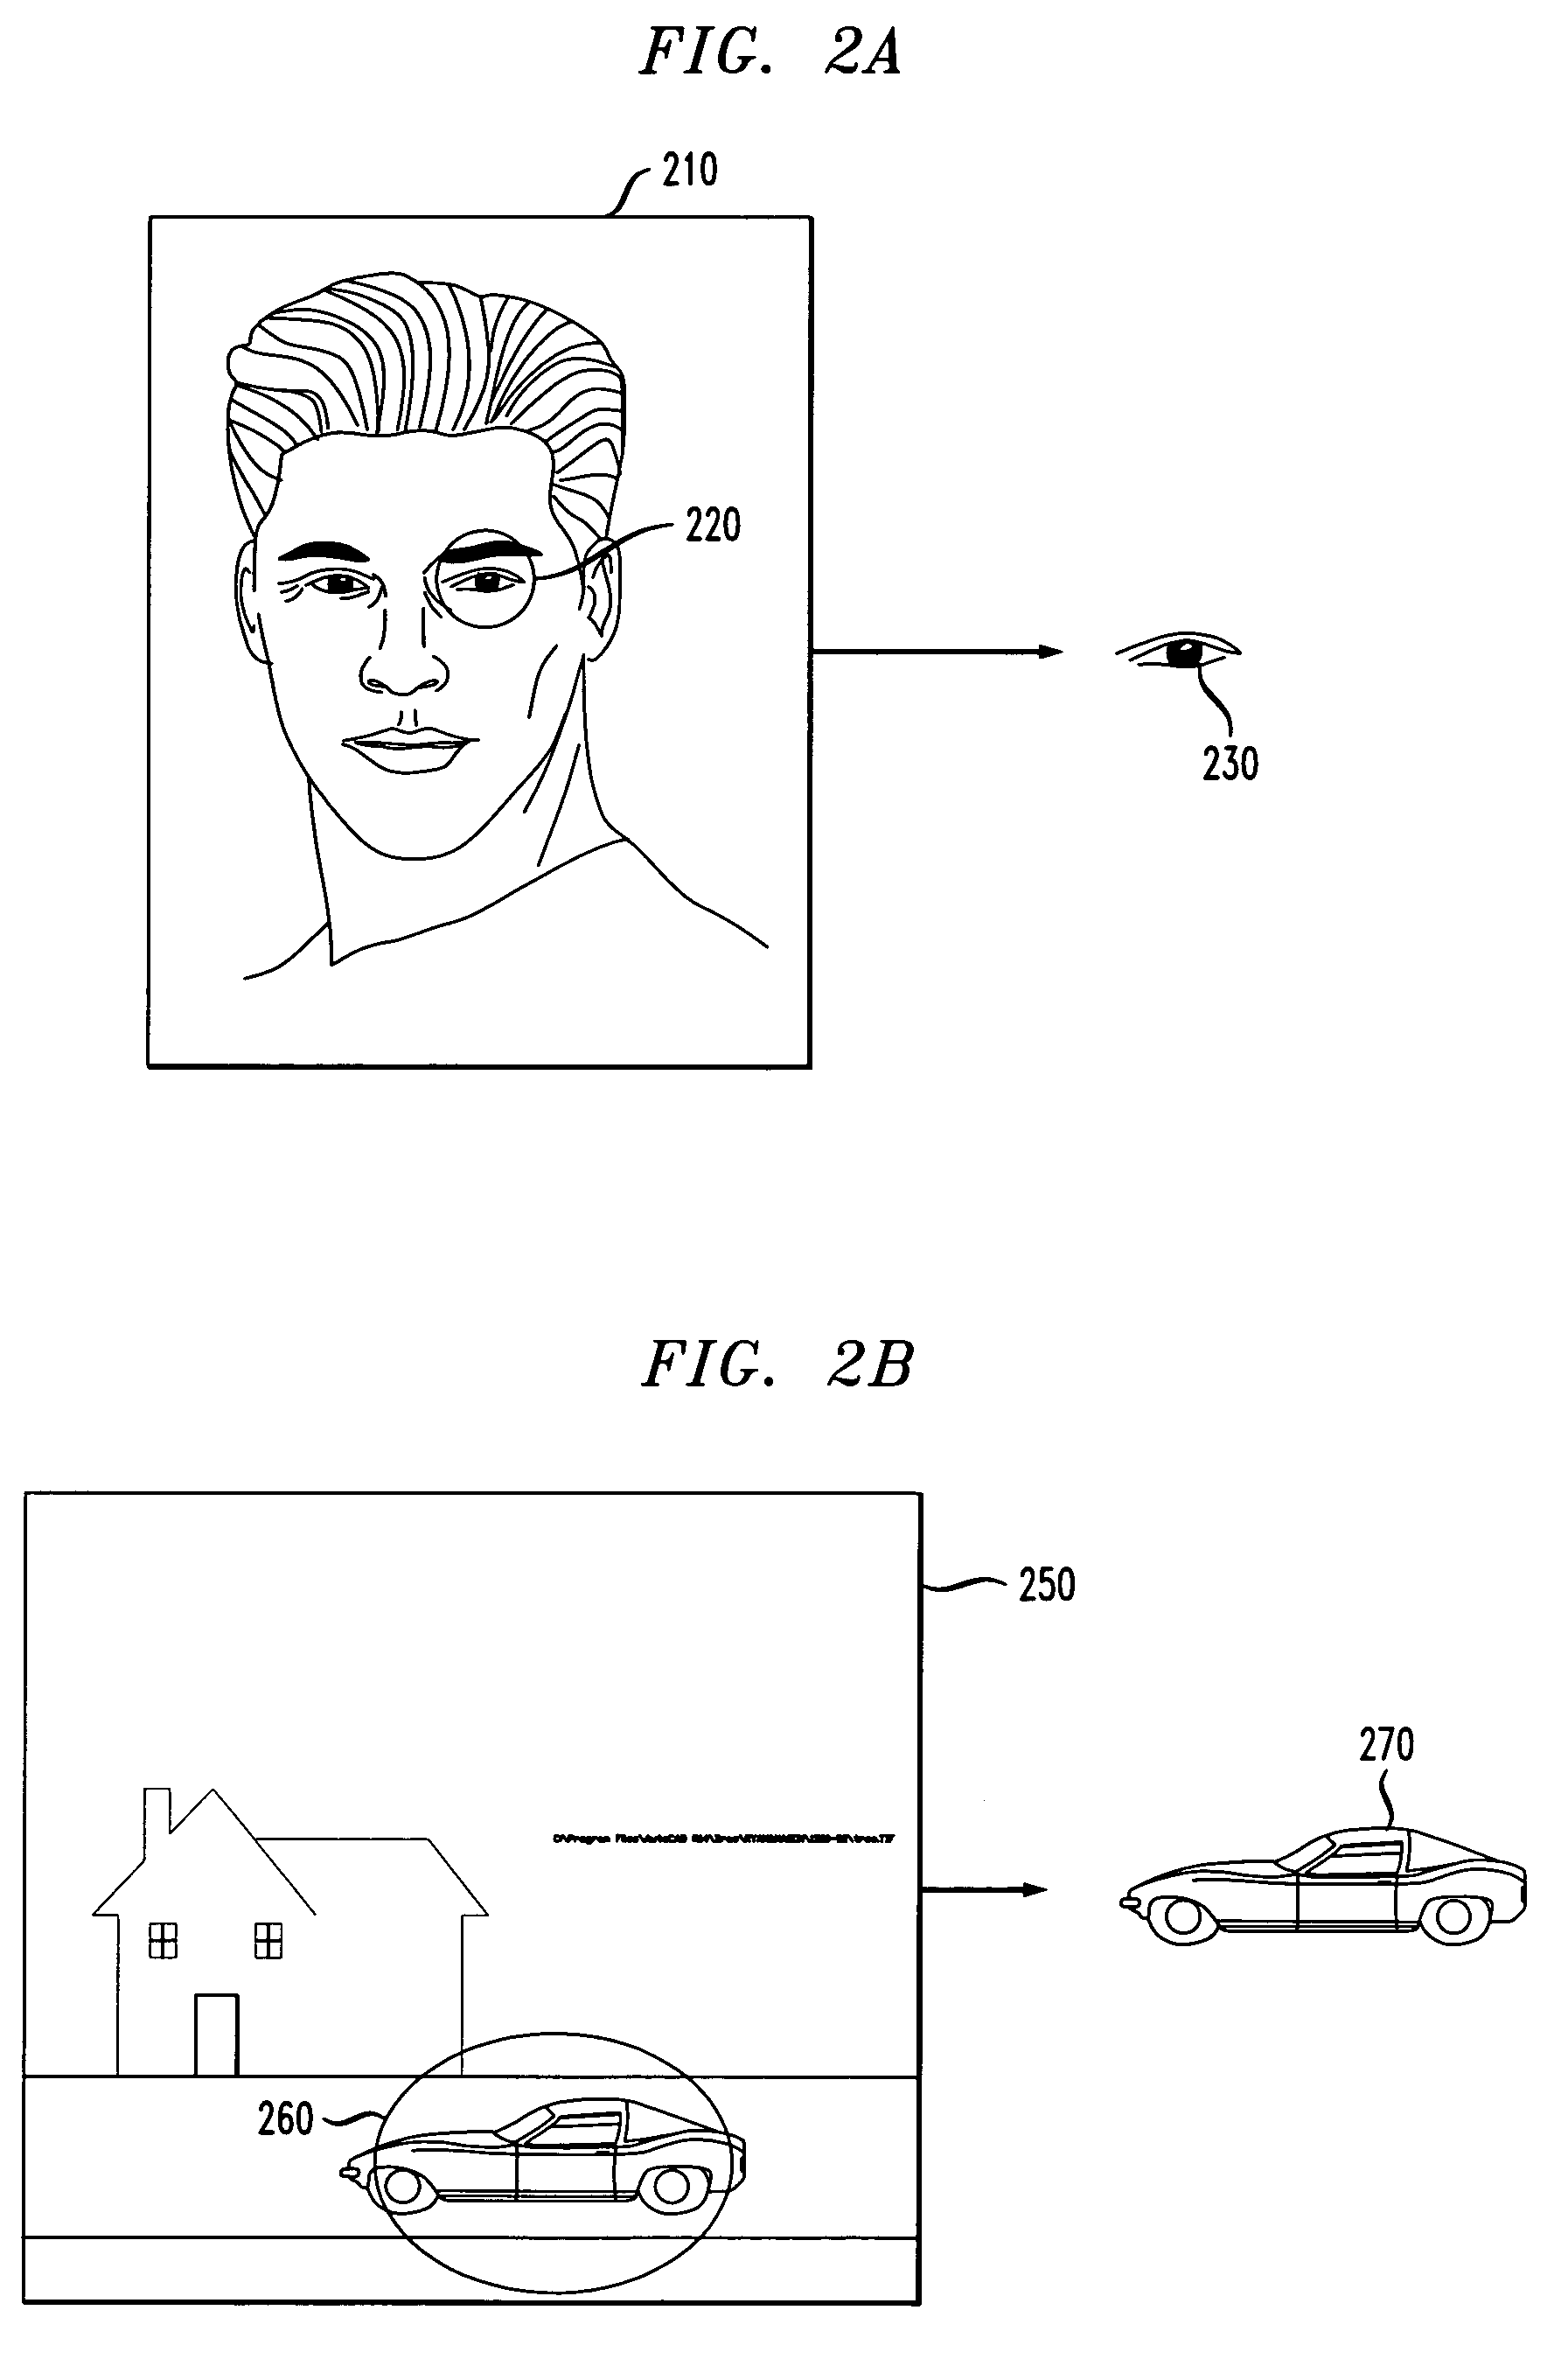 Method and apparatus for determining a region in an image based on a user input